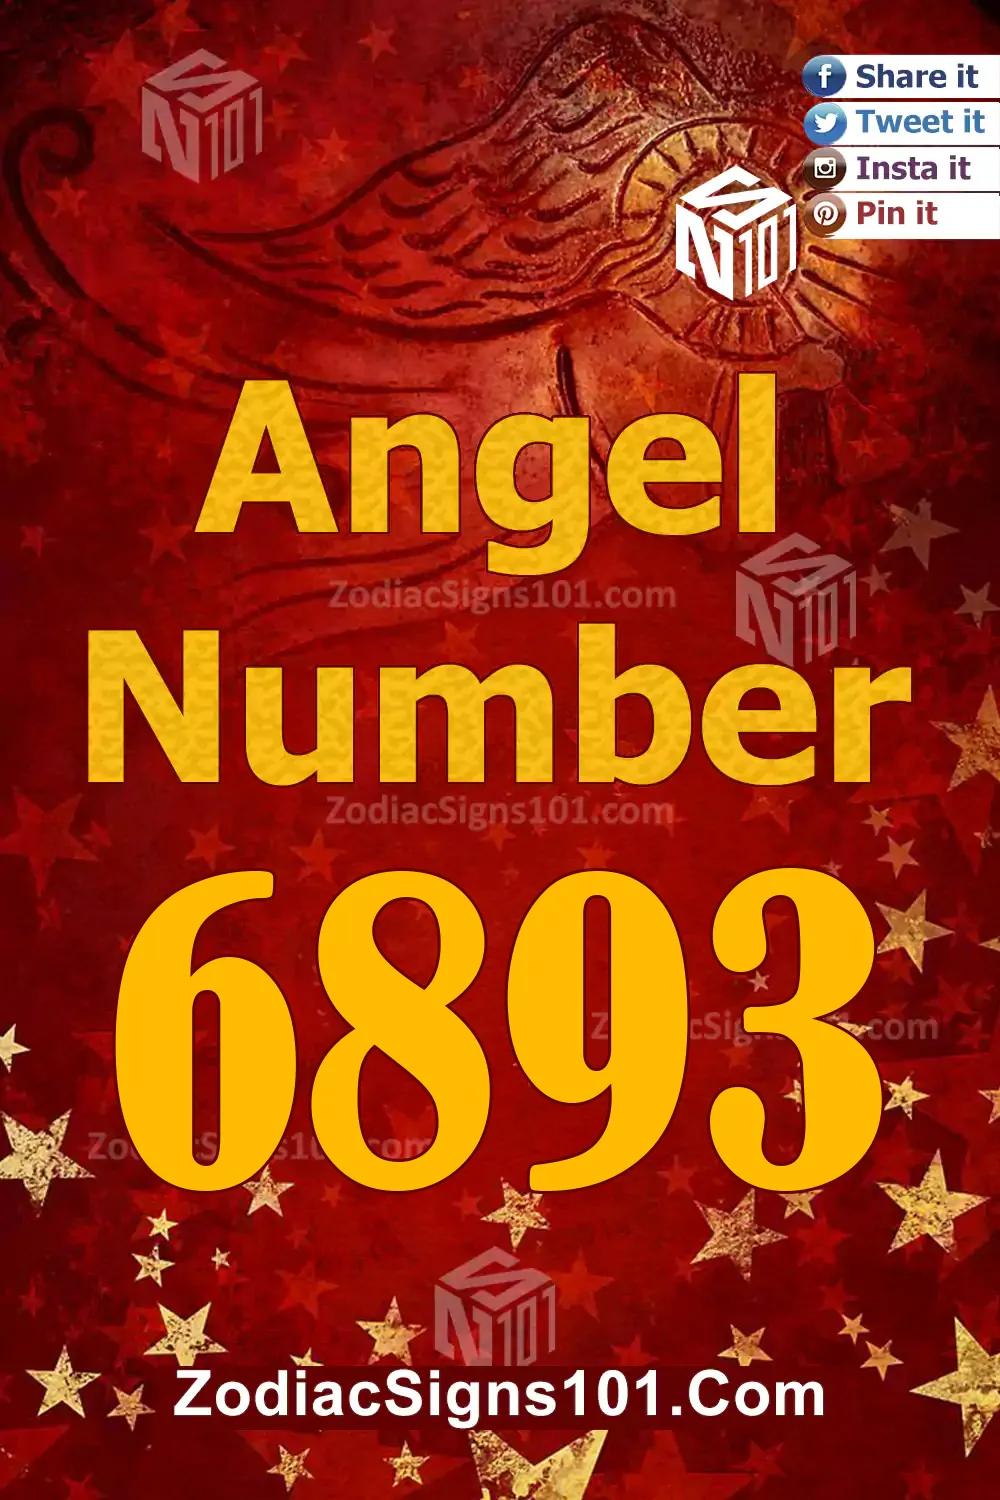 6893 Angel Number Meaning